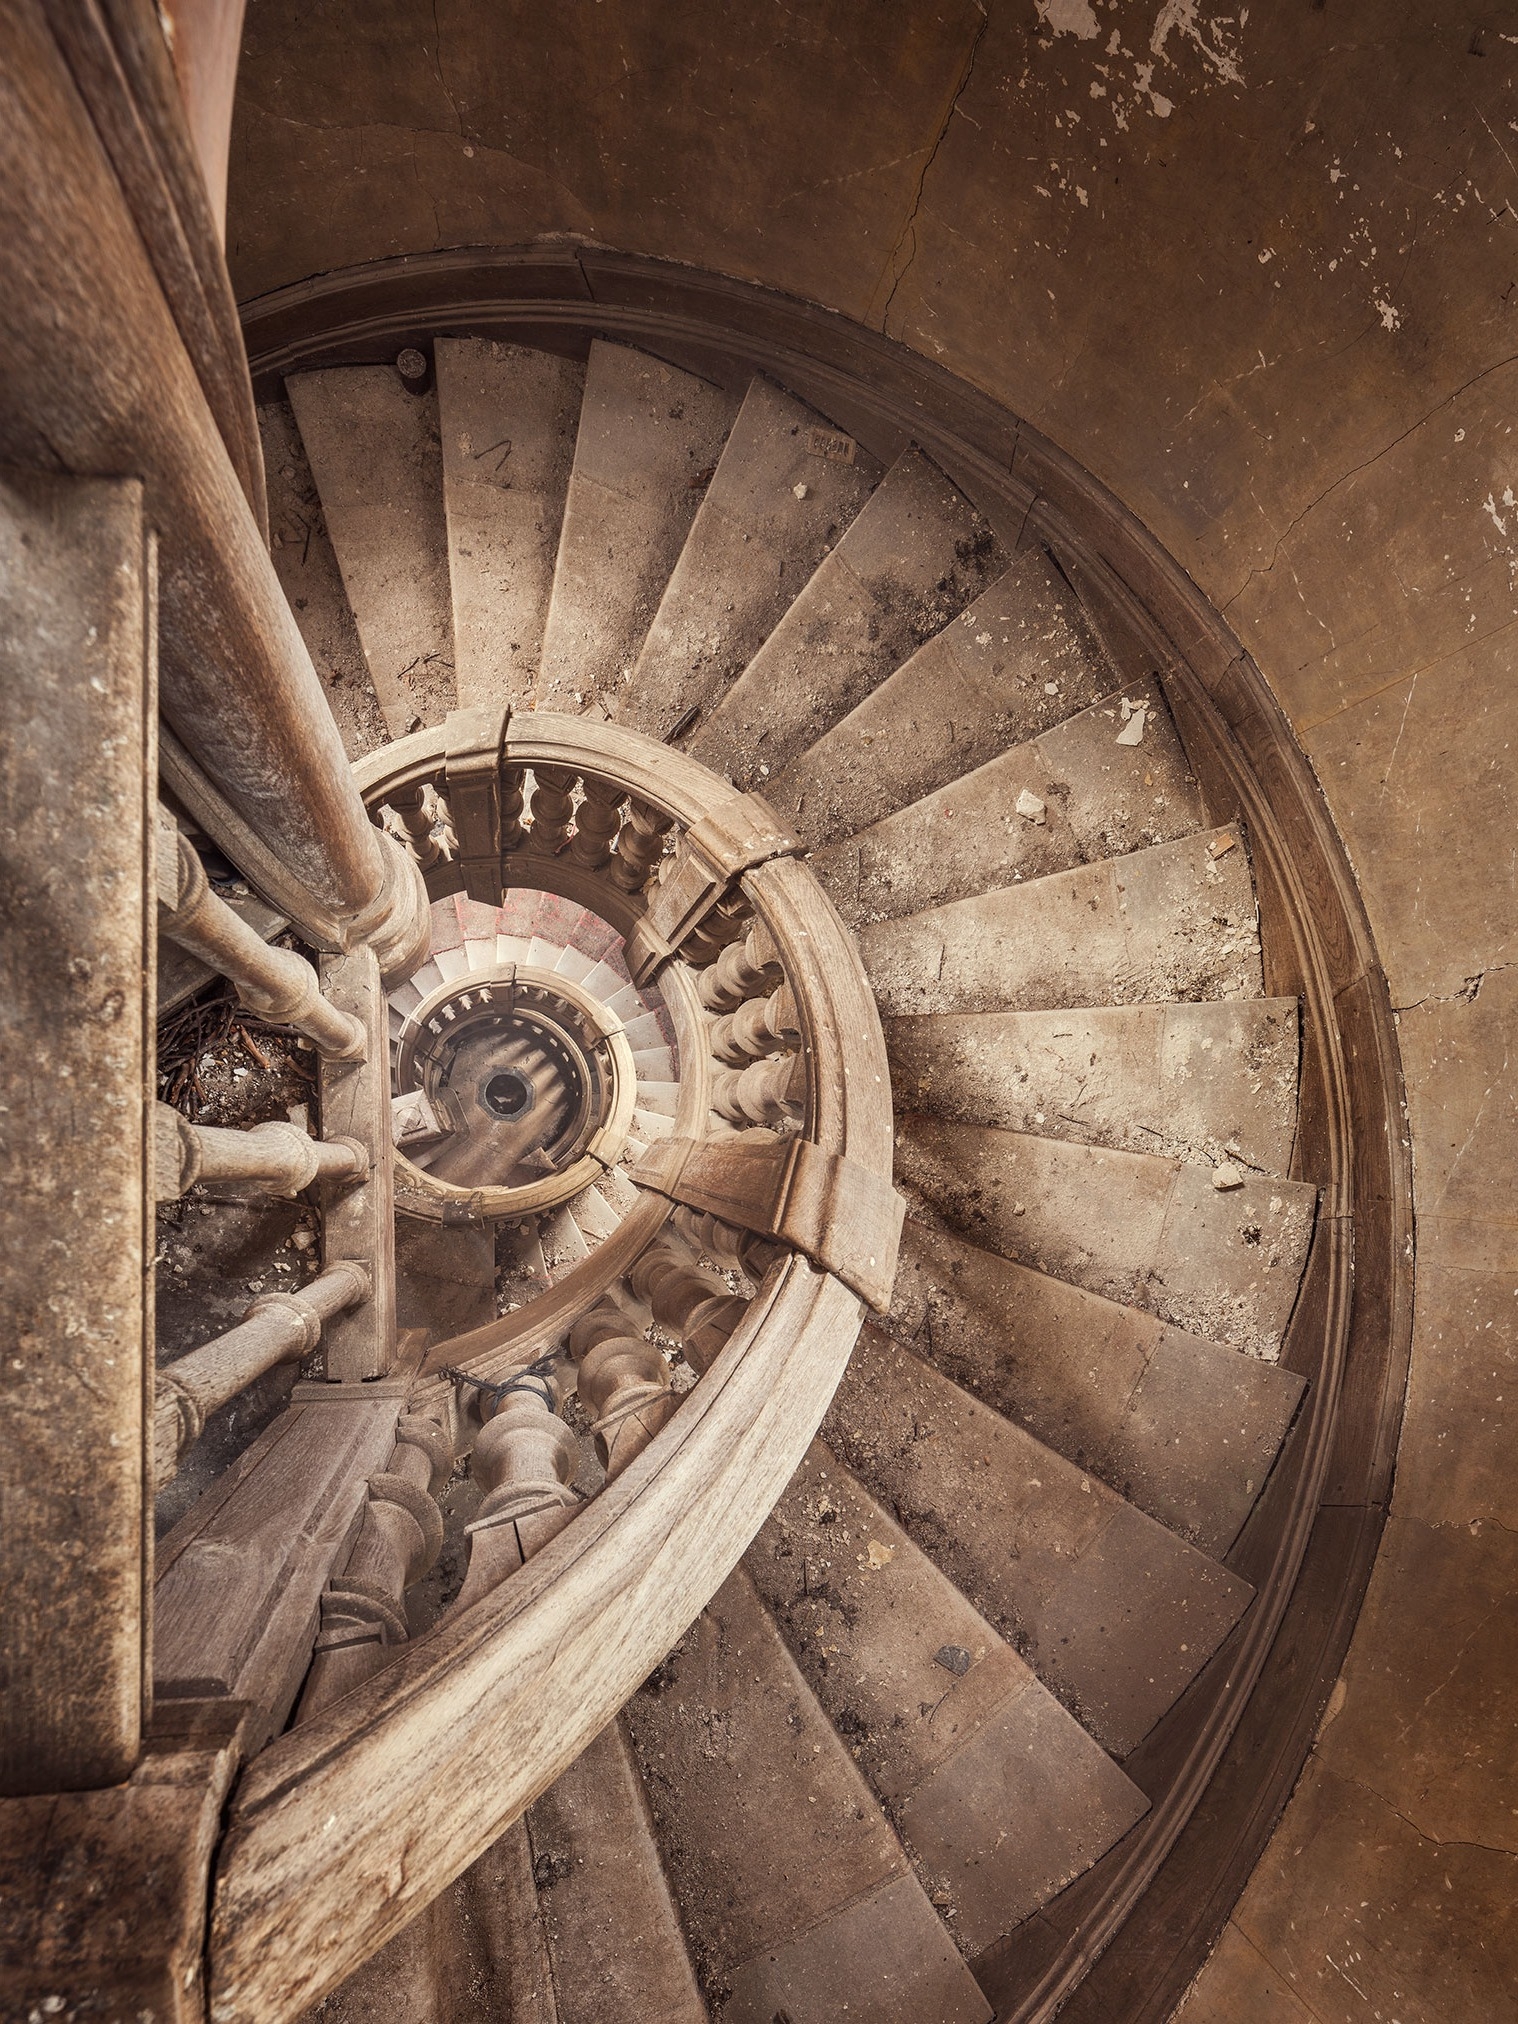 Spiral staircase in an abandoned castle in France